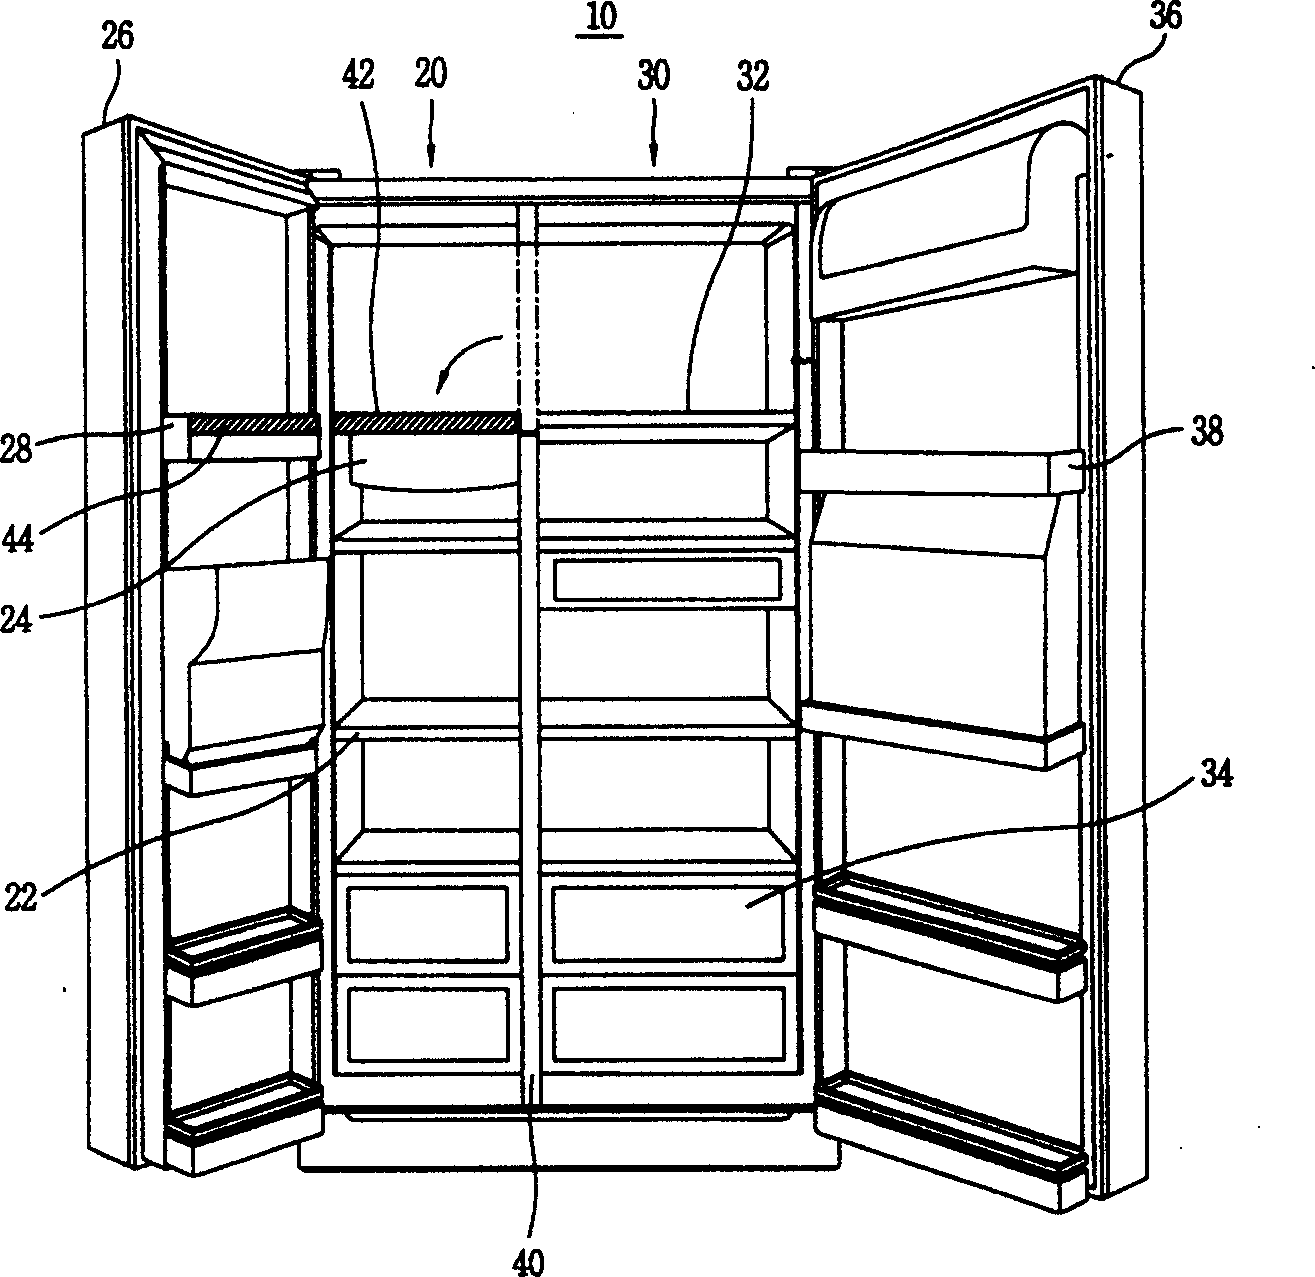 Refrigerator with adjustable cold storing and freezing space